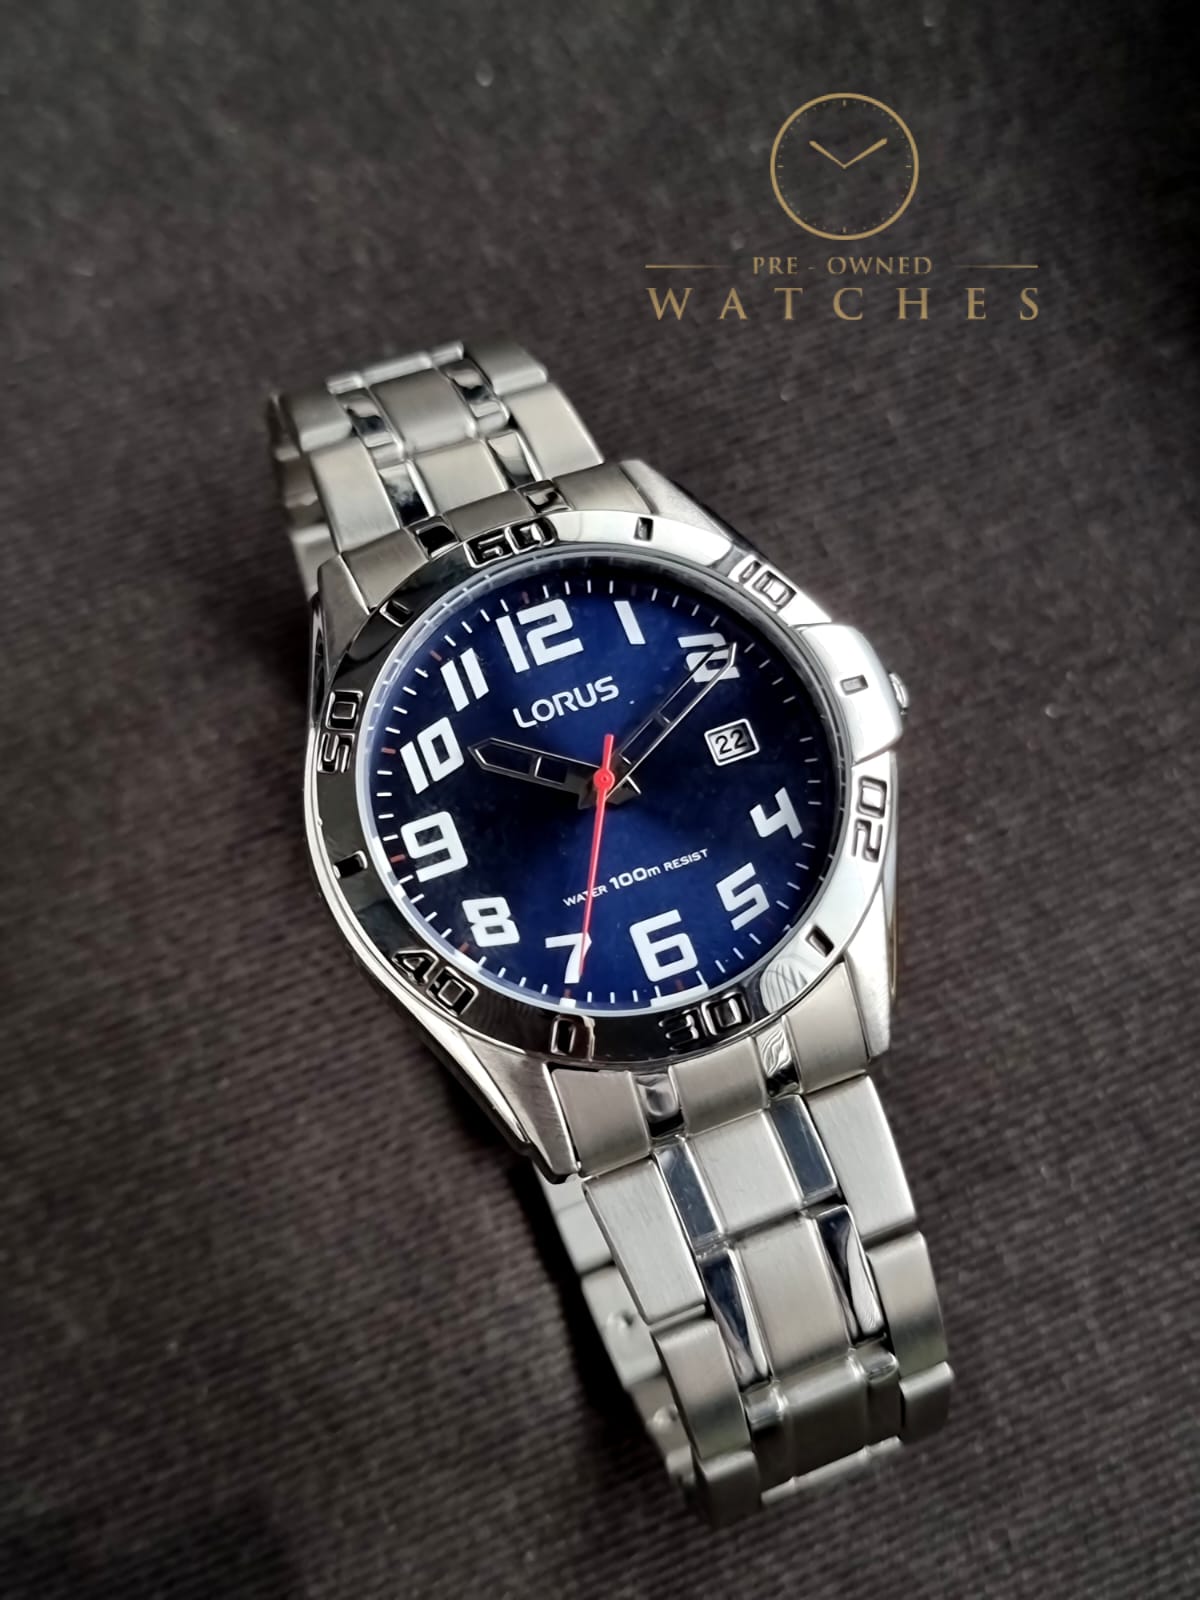 Lorus Sub Brand Of Seiko Gents Watch Blue dial 40mm Dial Size